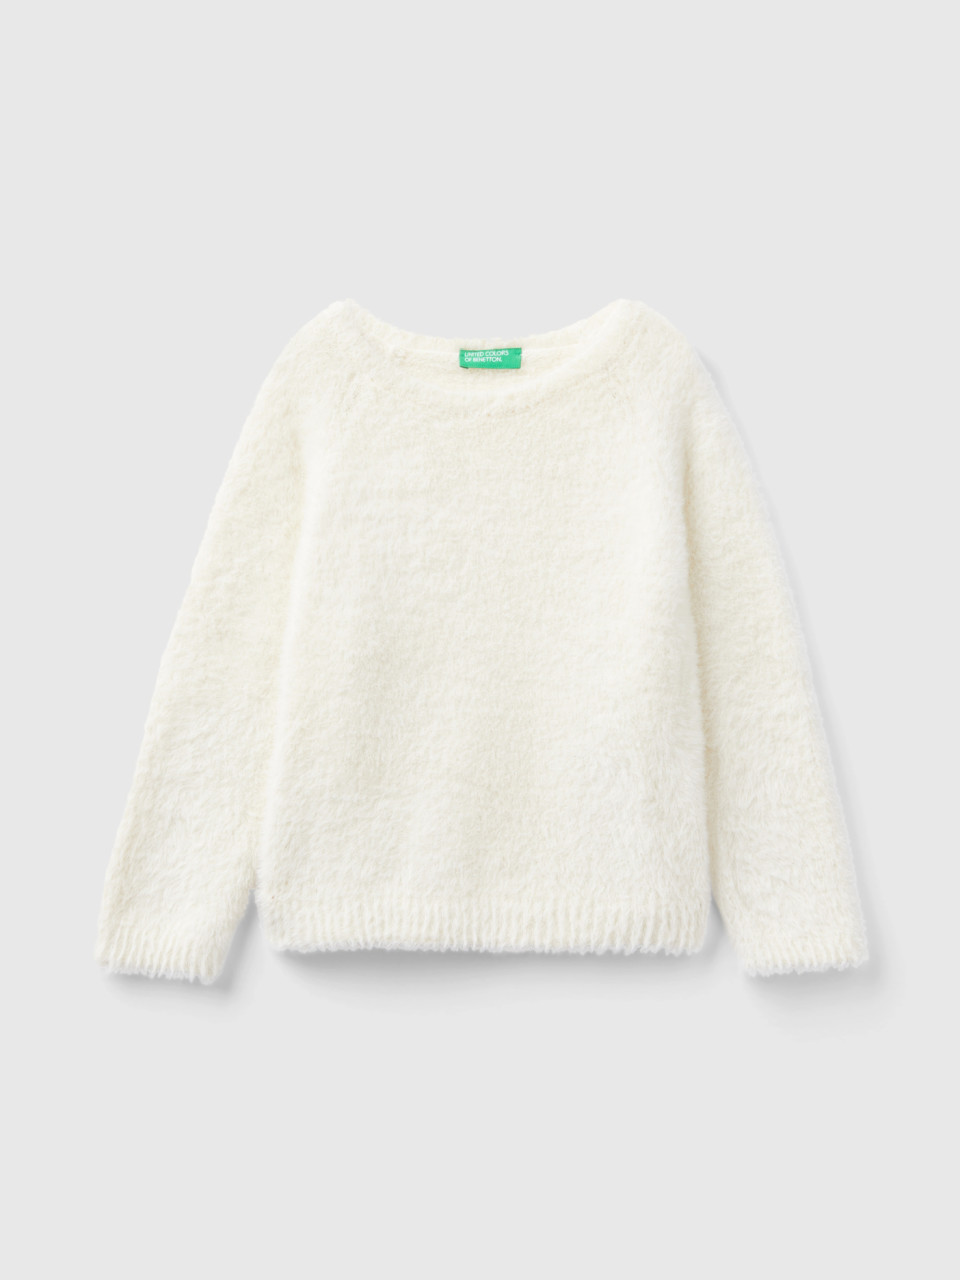 Benetton, Sweater With Faux Fur, Creamy White, Kids